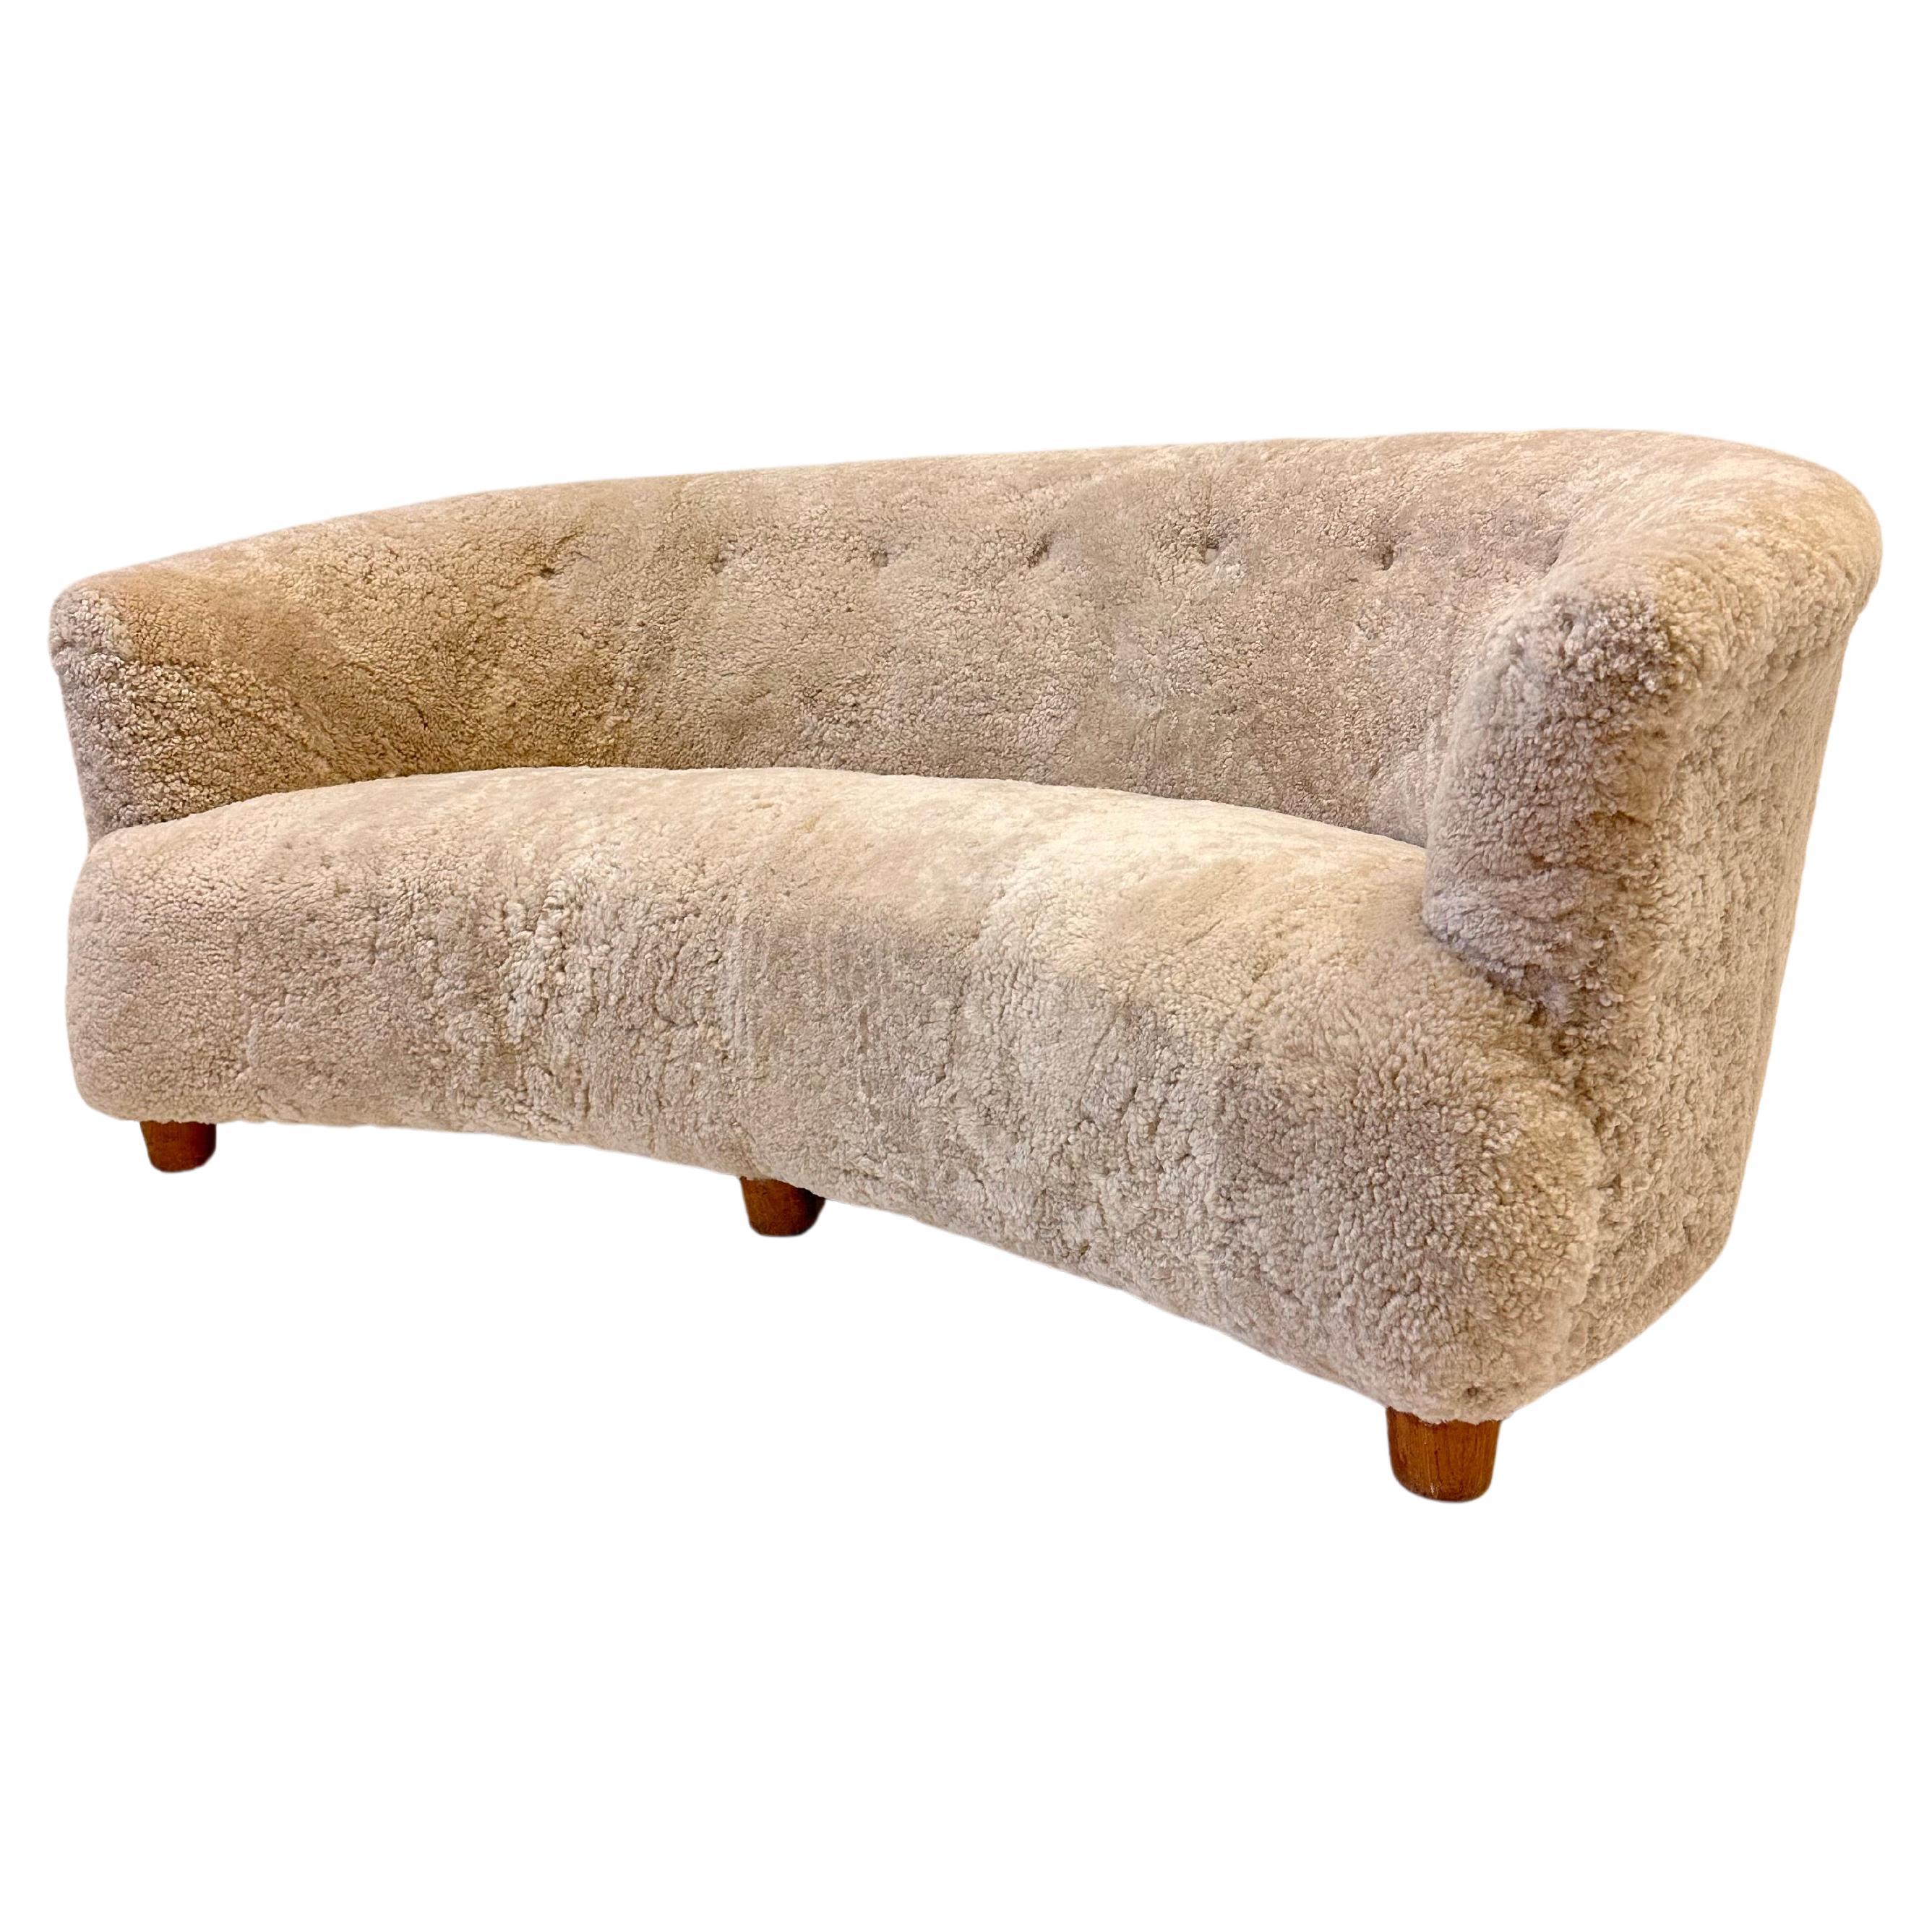 Otto Schulz att. Sofa with Sheepskin upholstery, Sweden -1950s For Sale